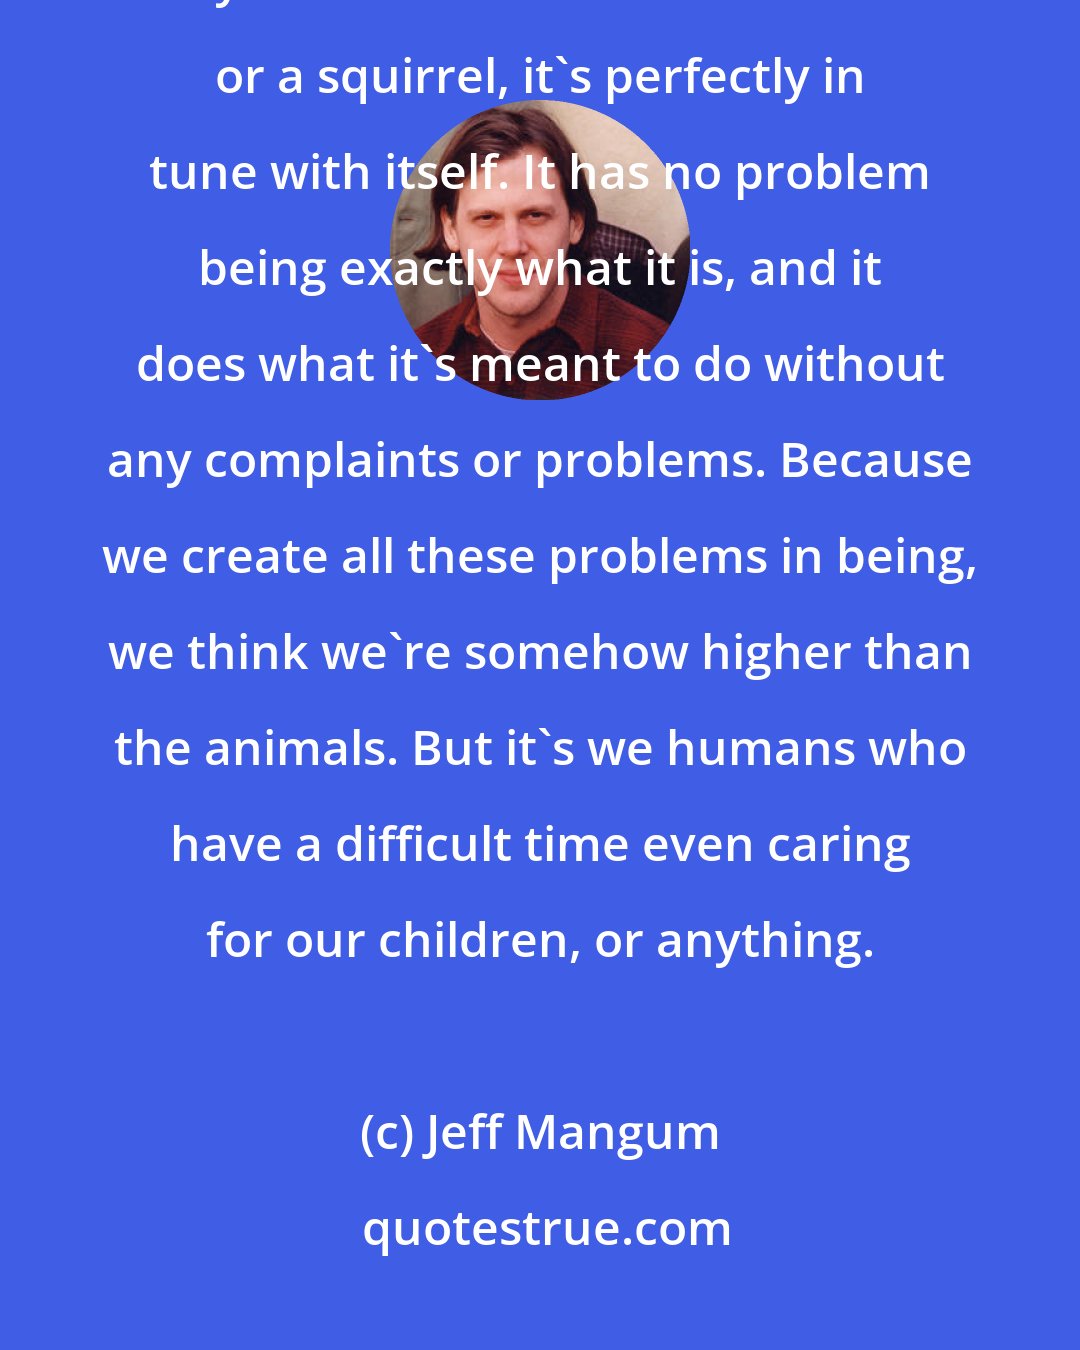 Jeff Mangum: We consider the animals to be lower, and to me, that makes no sense at all. If you look at a tree or a mushroom or a squirrel, it's perfectly in tune with itself. It has no problem being exactly what it is, and it does what it's meant to do without any complaints or problems. Because we create all these problems in being, we think we're somehow higher than the animals. But it's we humans who have a difficult time even caring for our children, or anything.